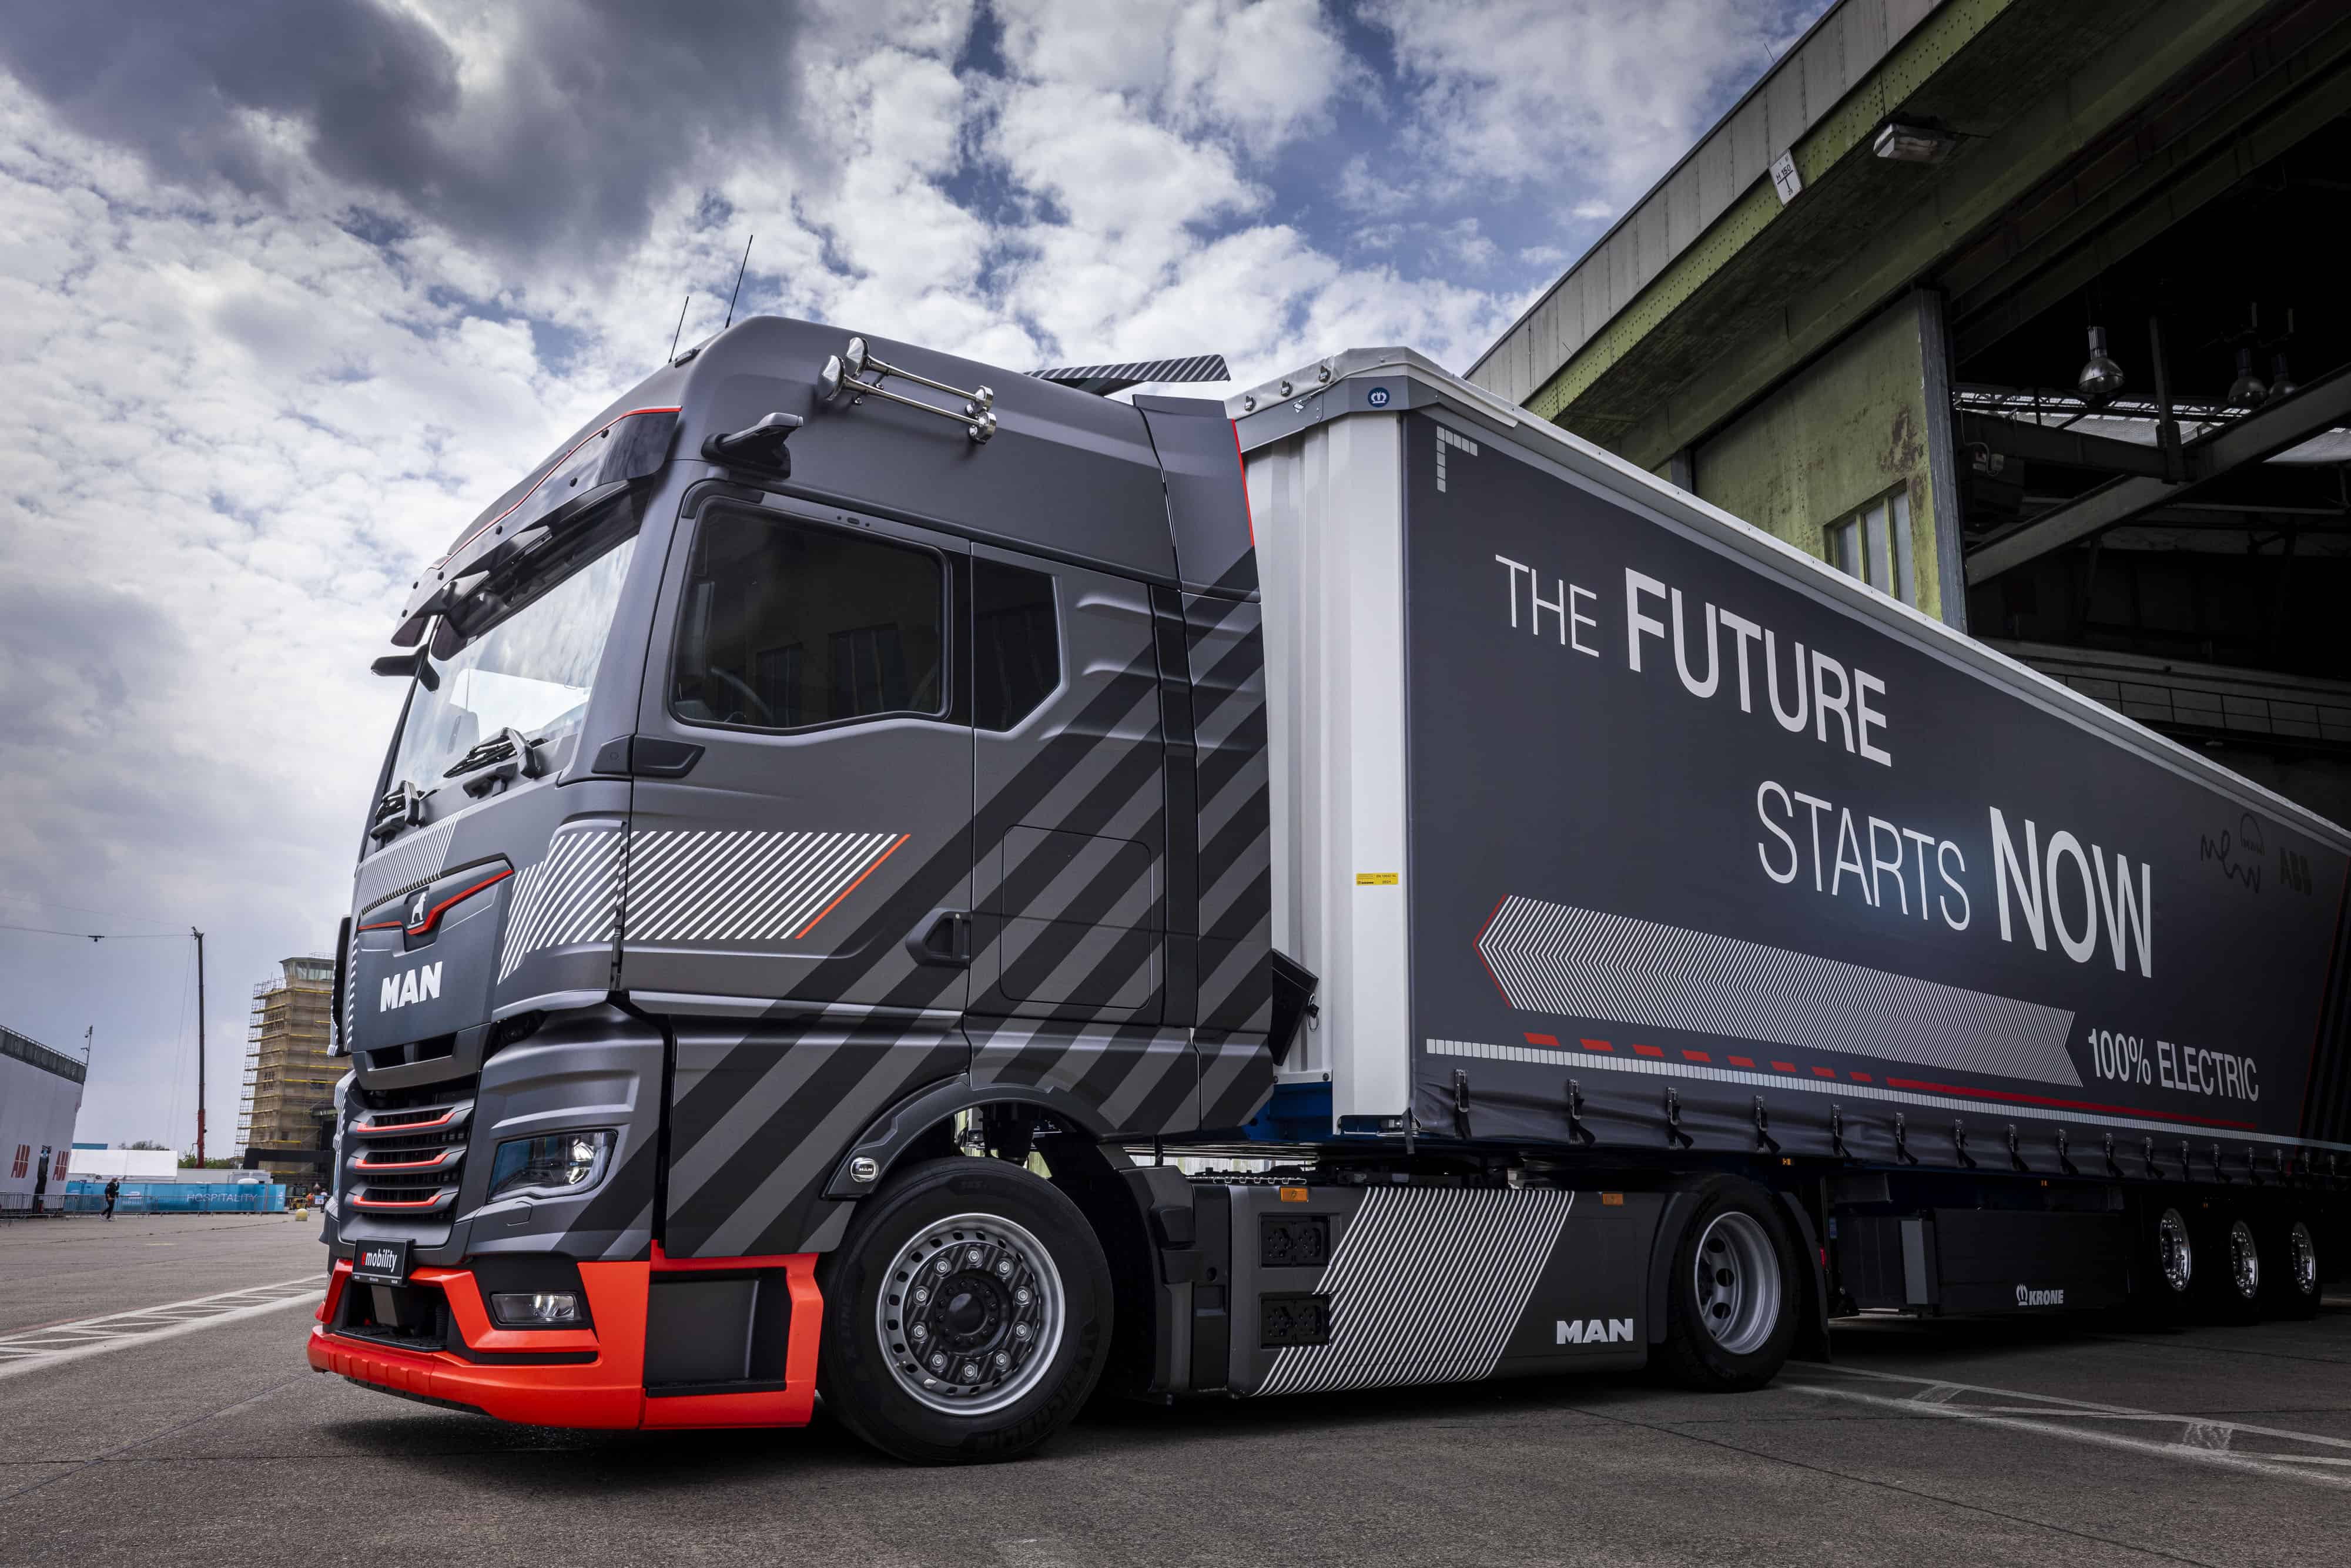 Hydrogen transport hits a brick wall: The harsh reality behind the fuel of the future